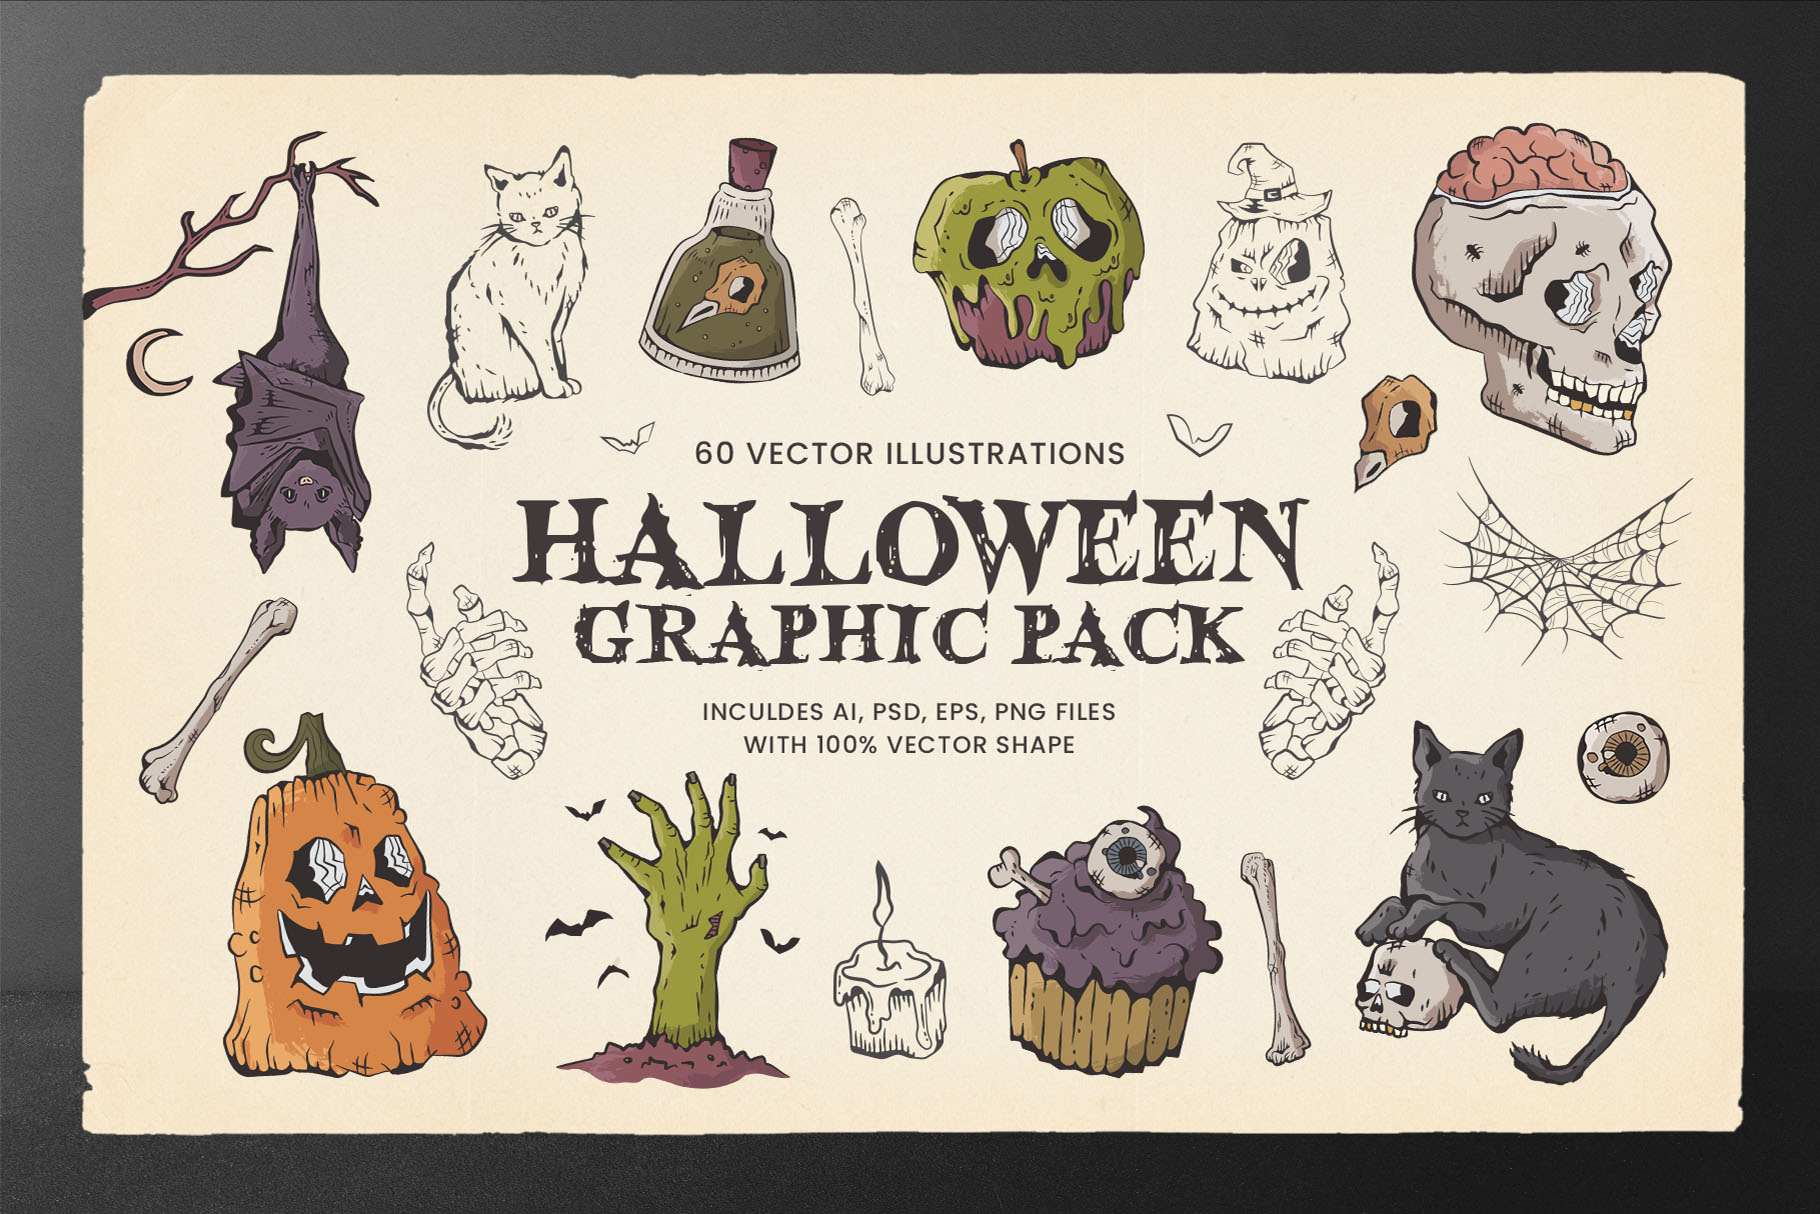 Hand Drawn Halloween Vector Clipart Illustrations in PSD, Ai, EPS & PNG Format